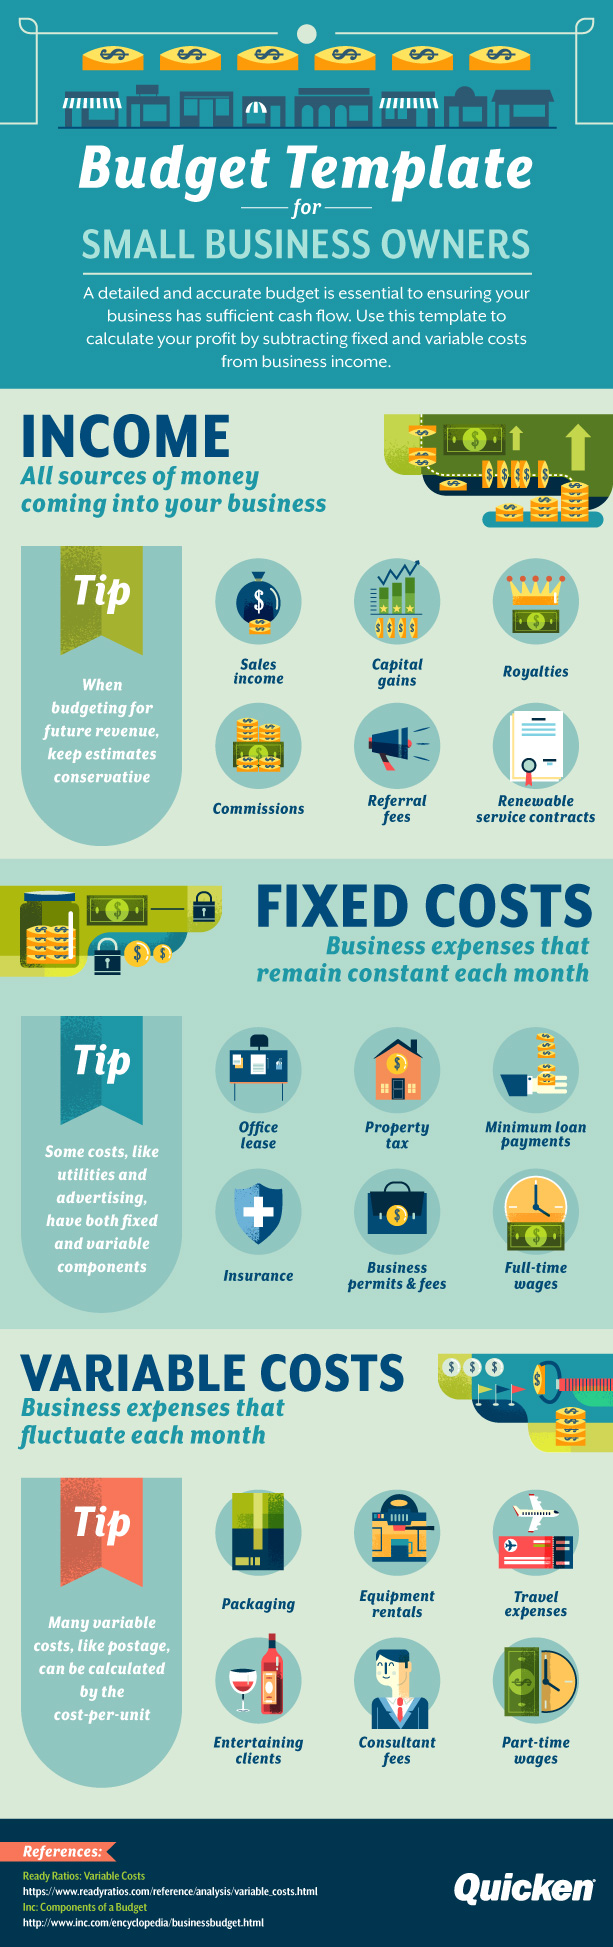 Small Business Budget Template Infographic